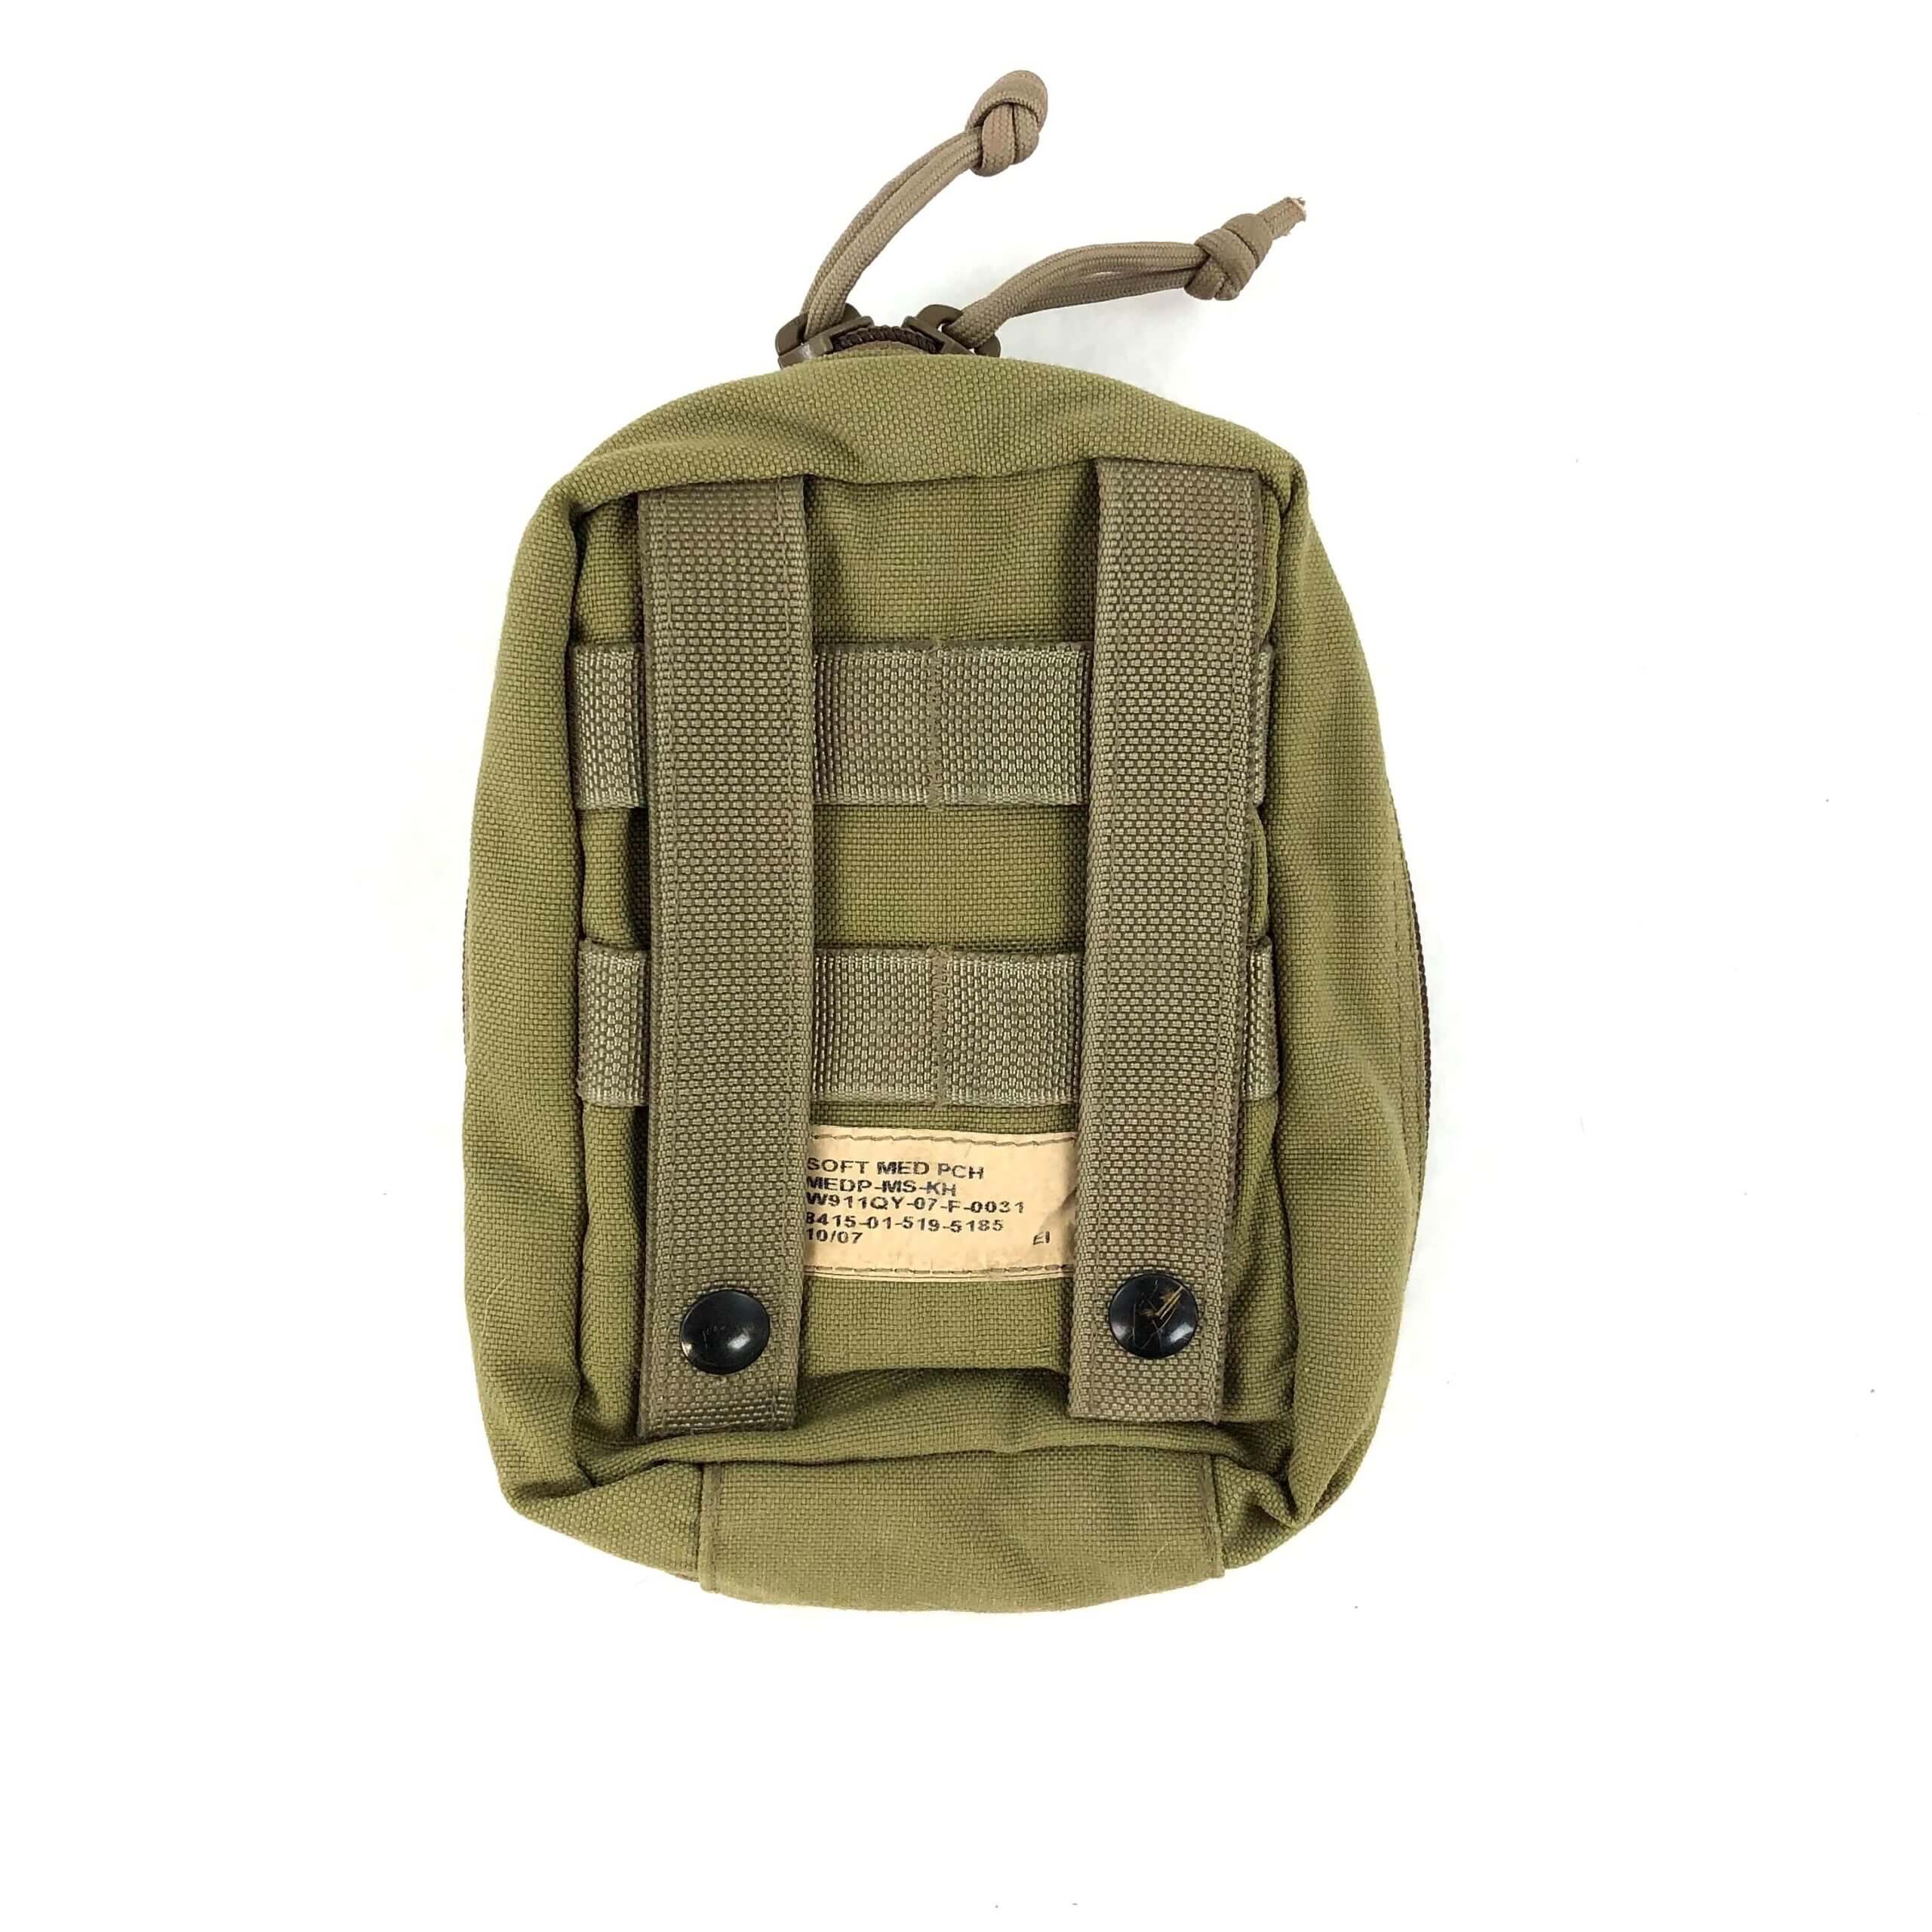 Eagle Industries SOF Medical Pouch, V1 [Genuine Army Issue]